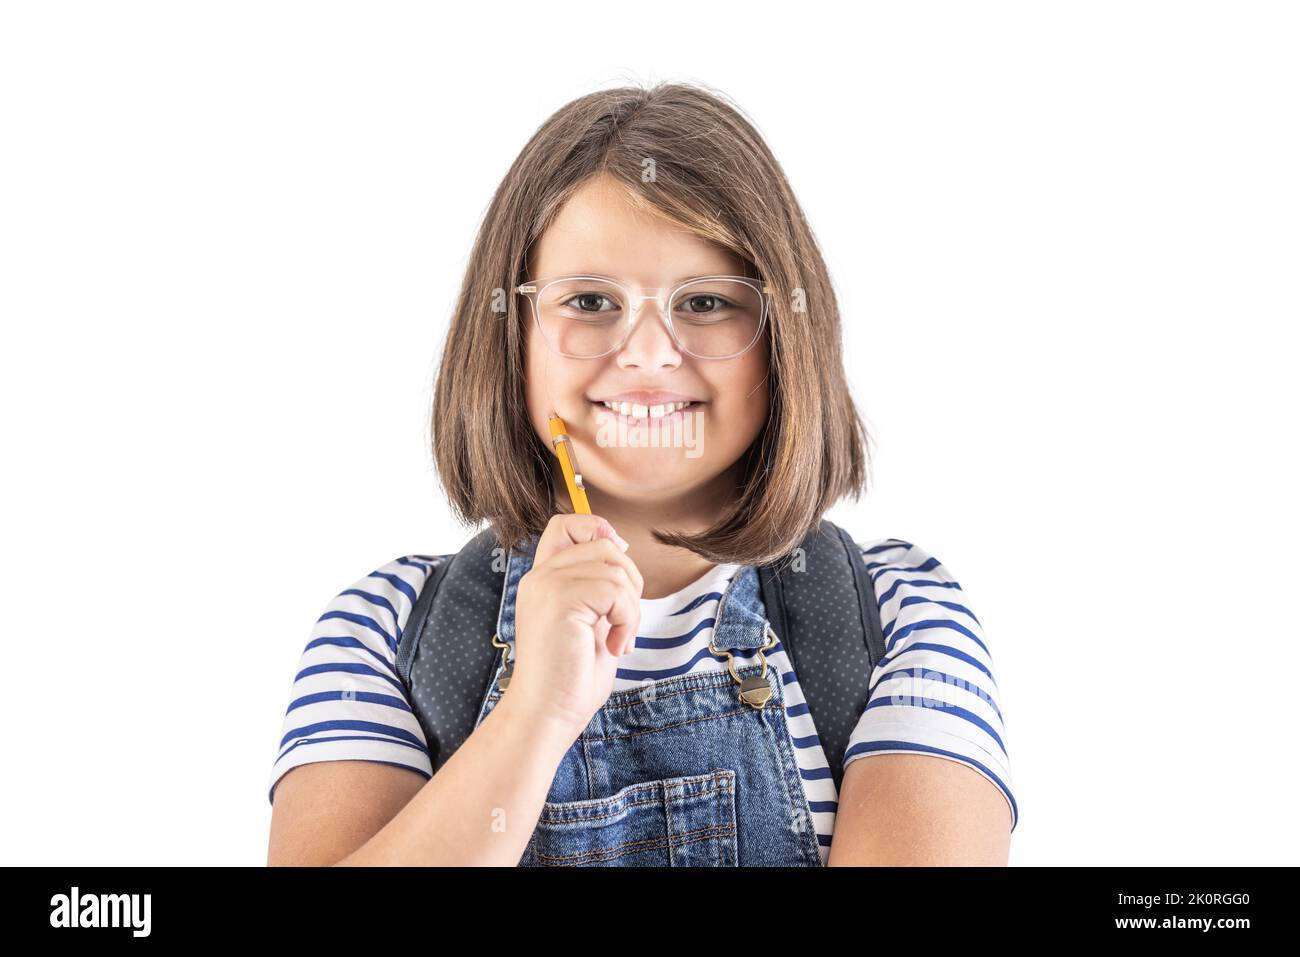 Smiling cute young schoolgirl in glasses holds pencil close to her mouth. Stock Photo